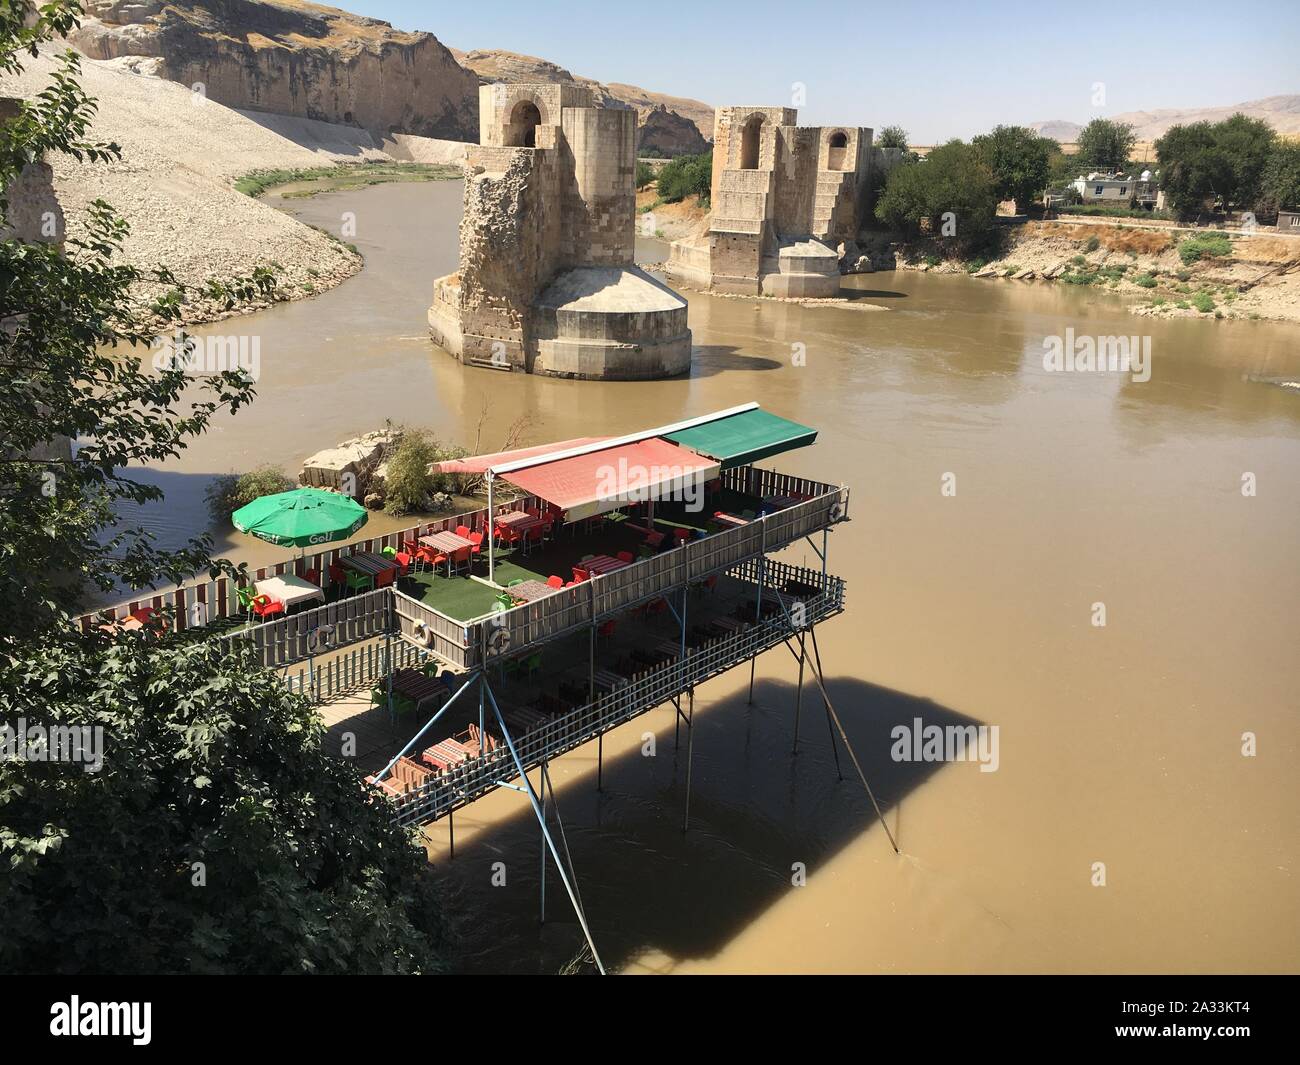 09 September 2019, Turkey, Hasankeyf: A picturesque cafe and centuries-old  bridge piers are located on the Tigris River. The village lies in a unique  cultural landscape on the Tigris. People have been